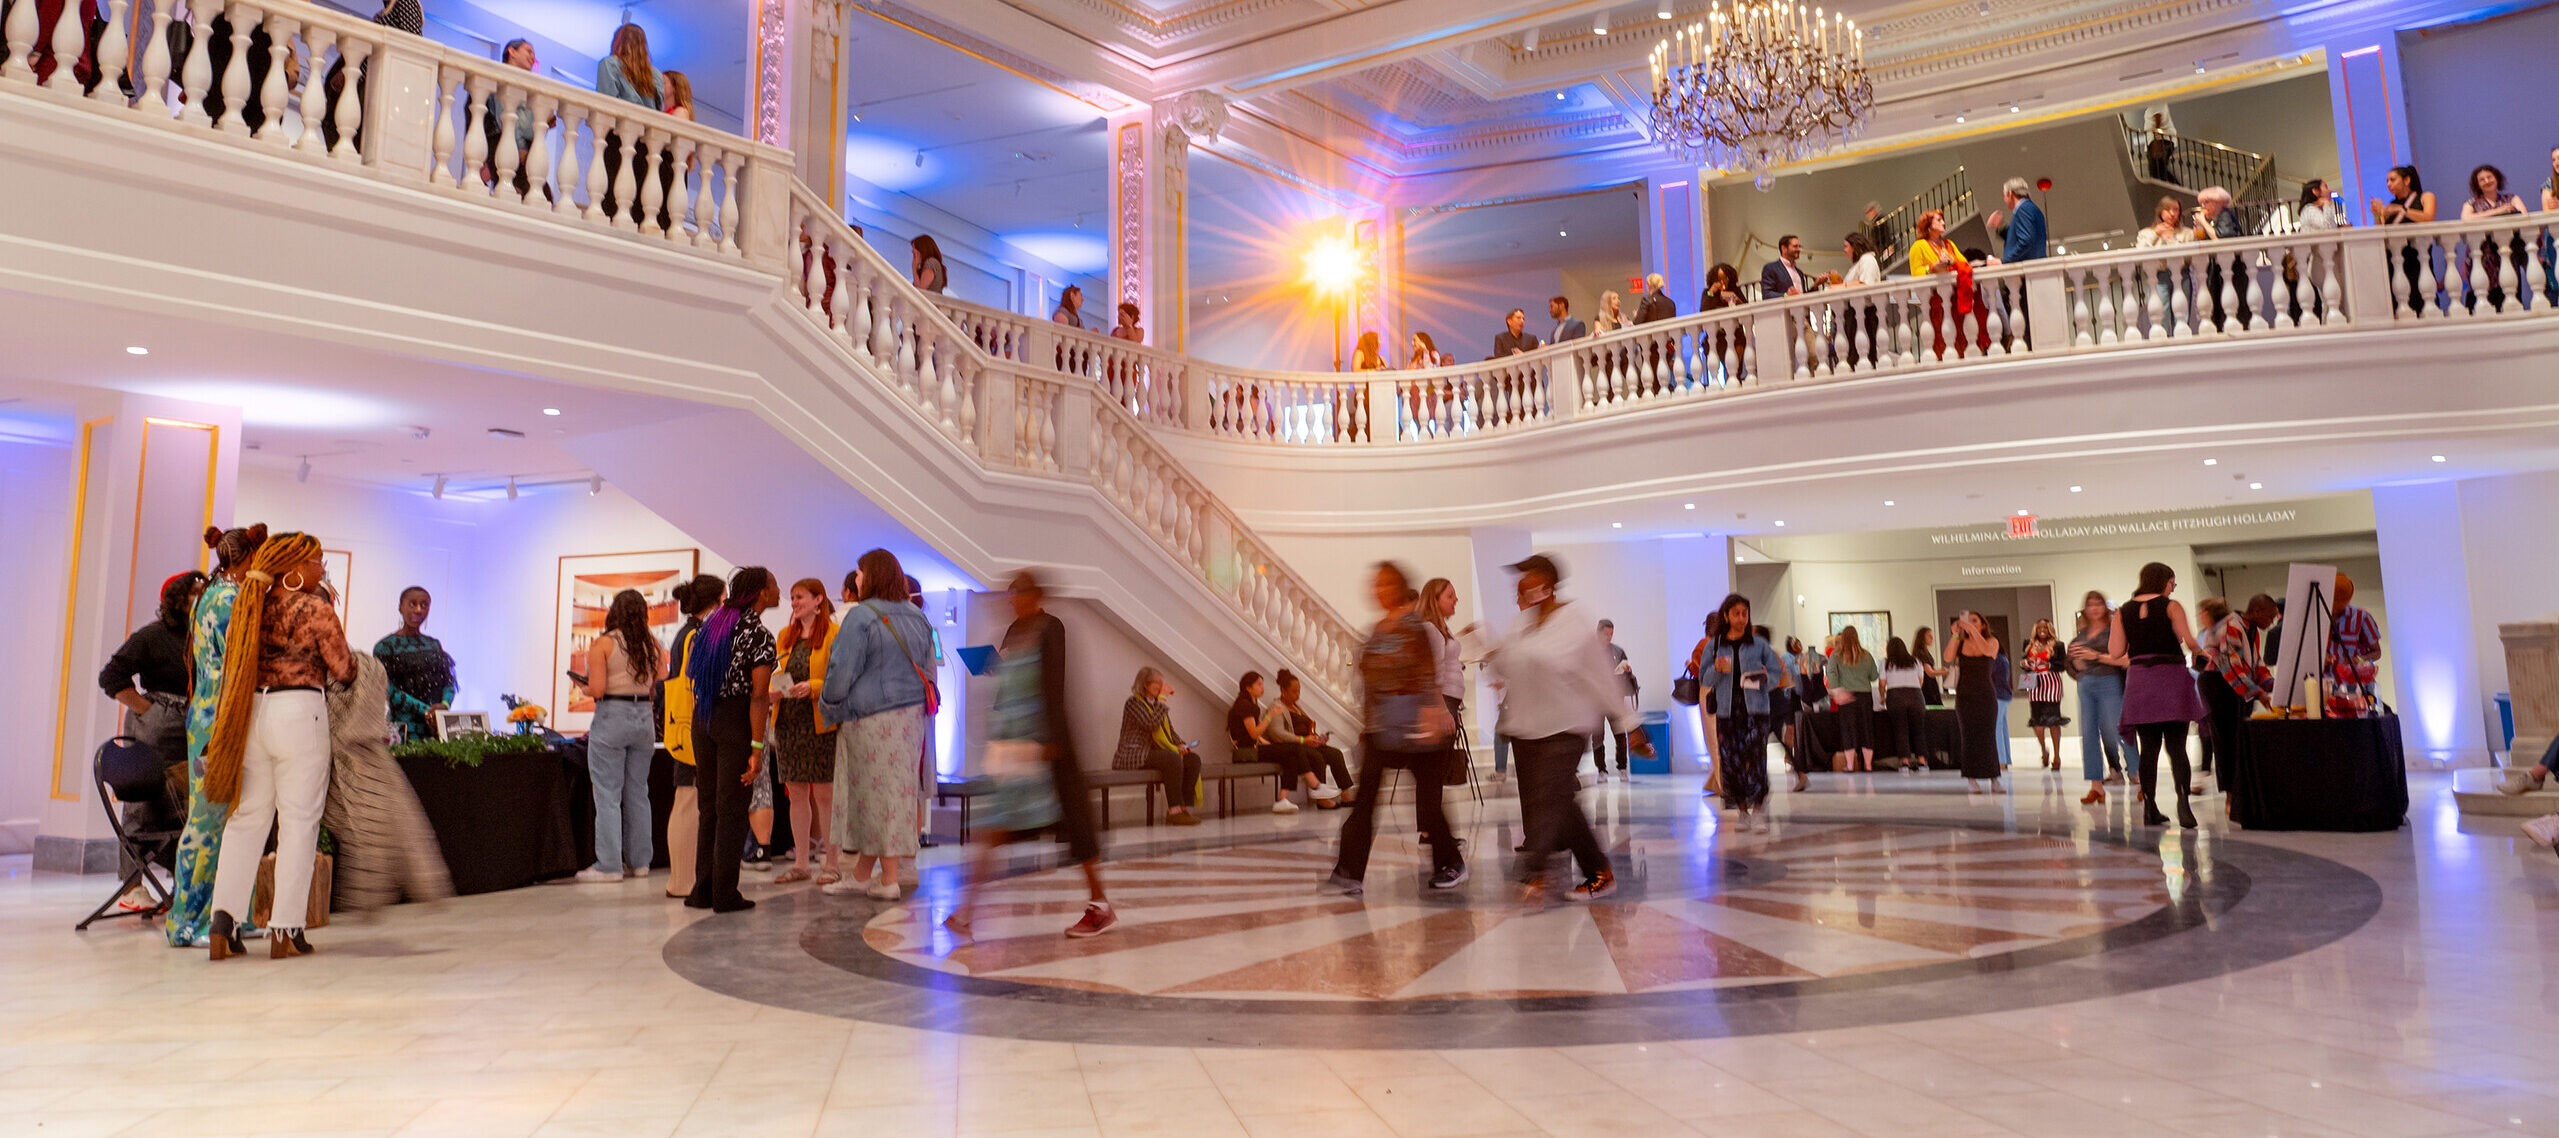 Groups of people enter a large white, marble room.